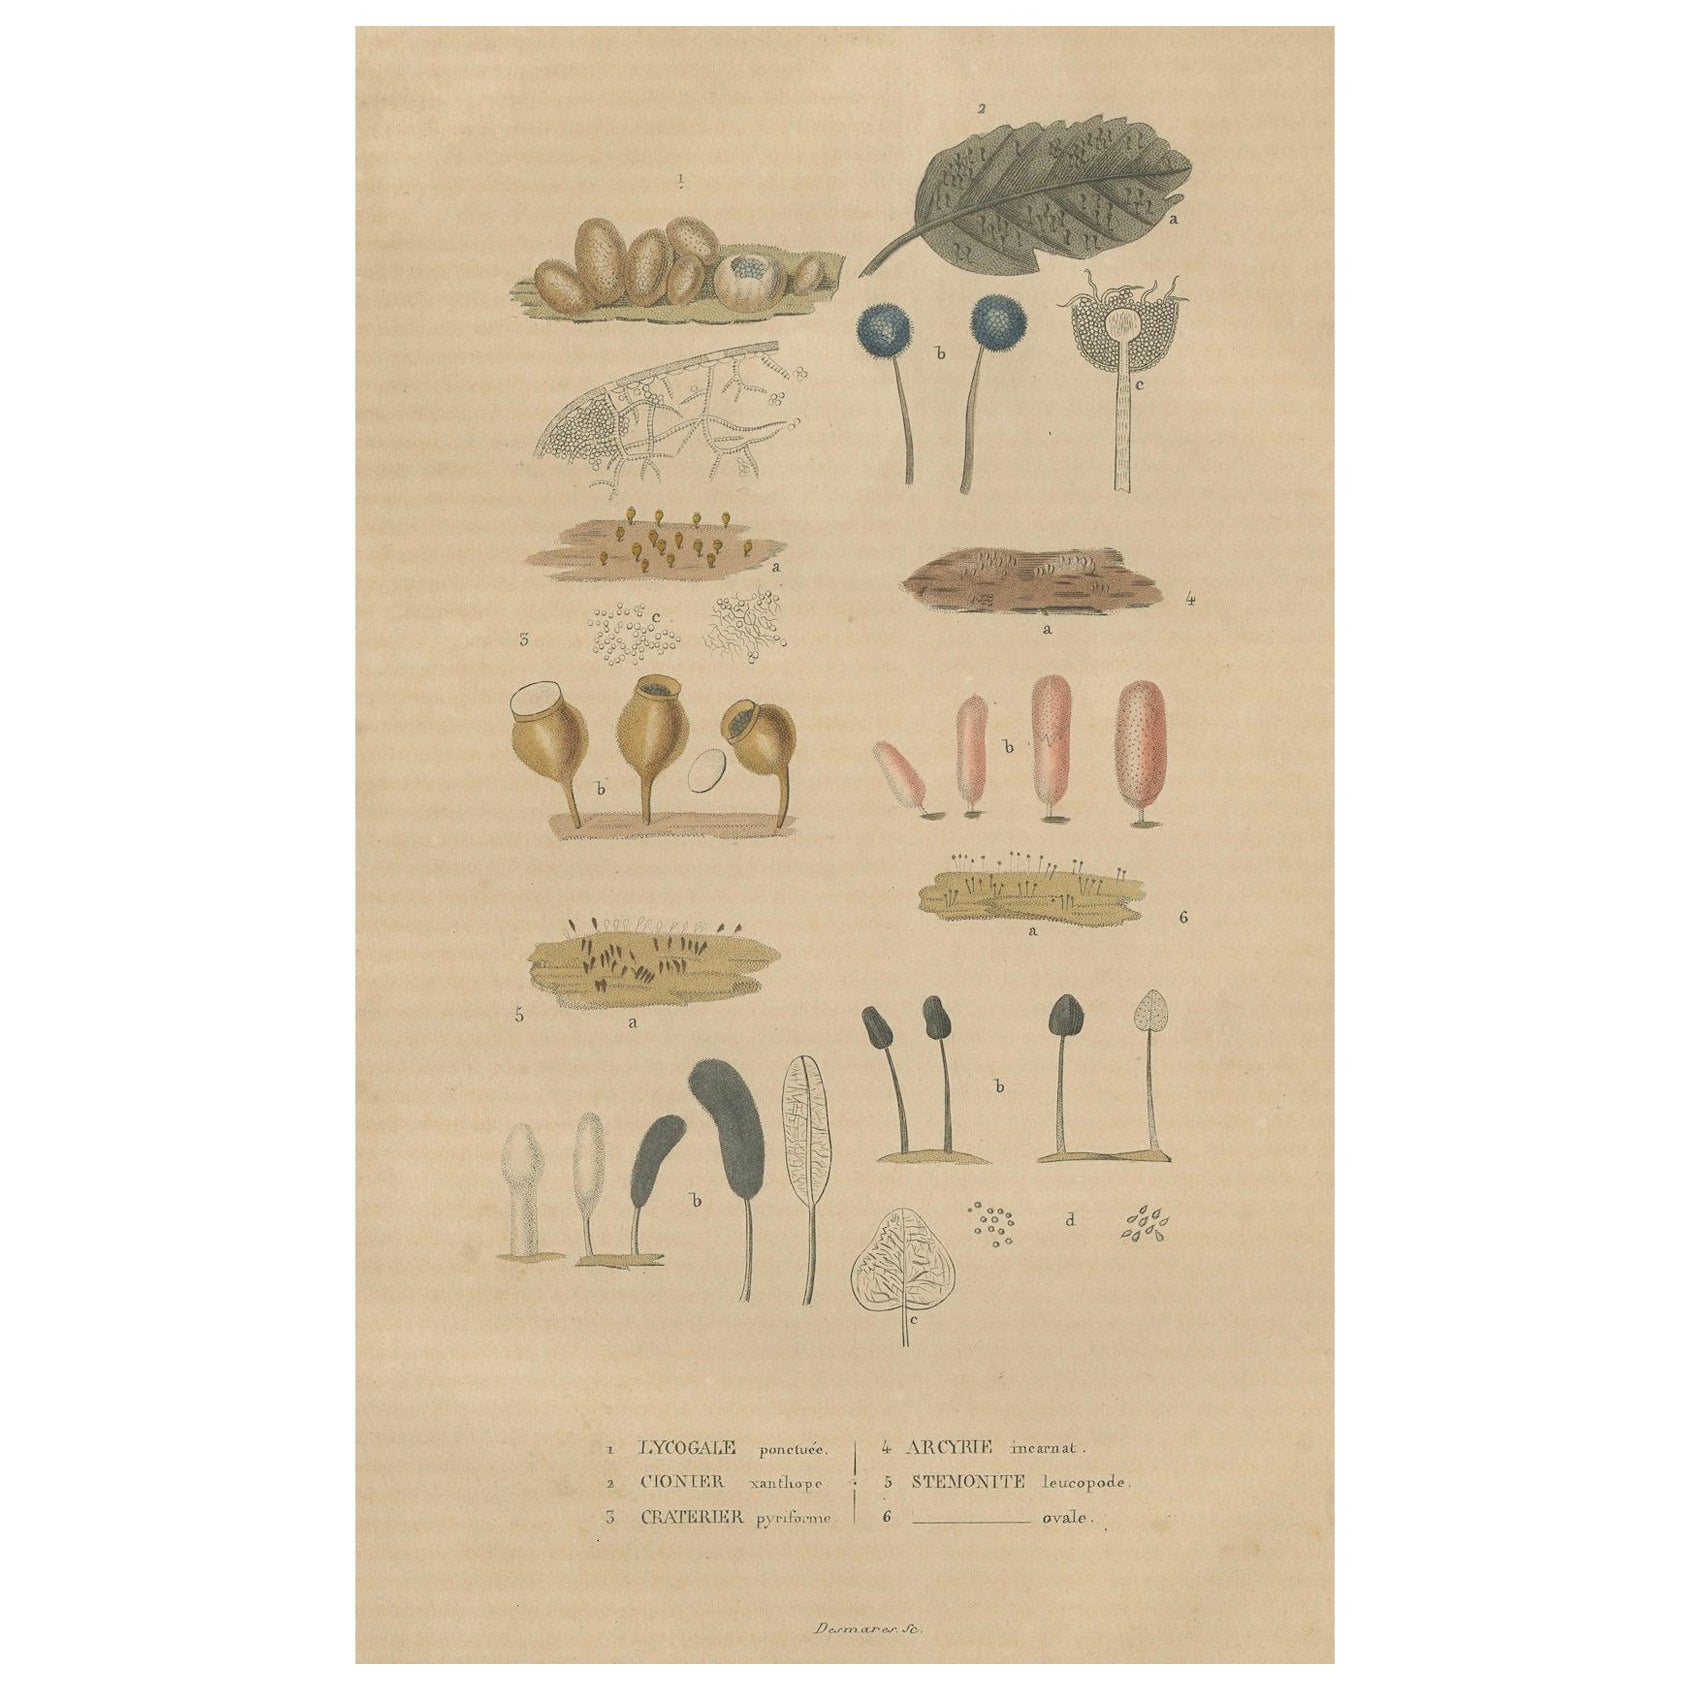 Fungal Forms: Illustrations of Mycological Diversity, 1845